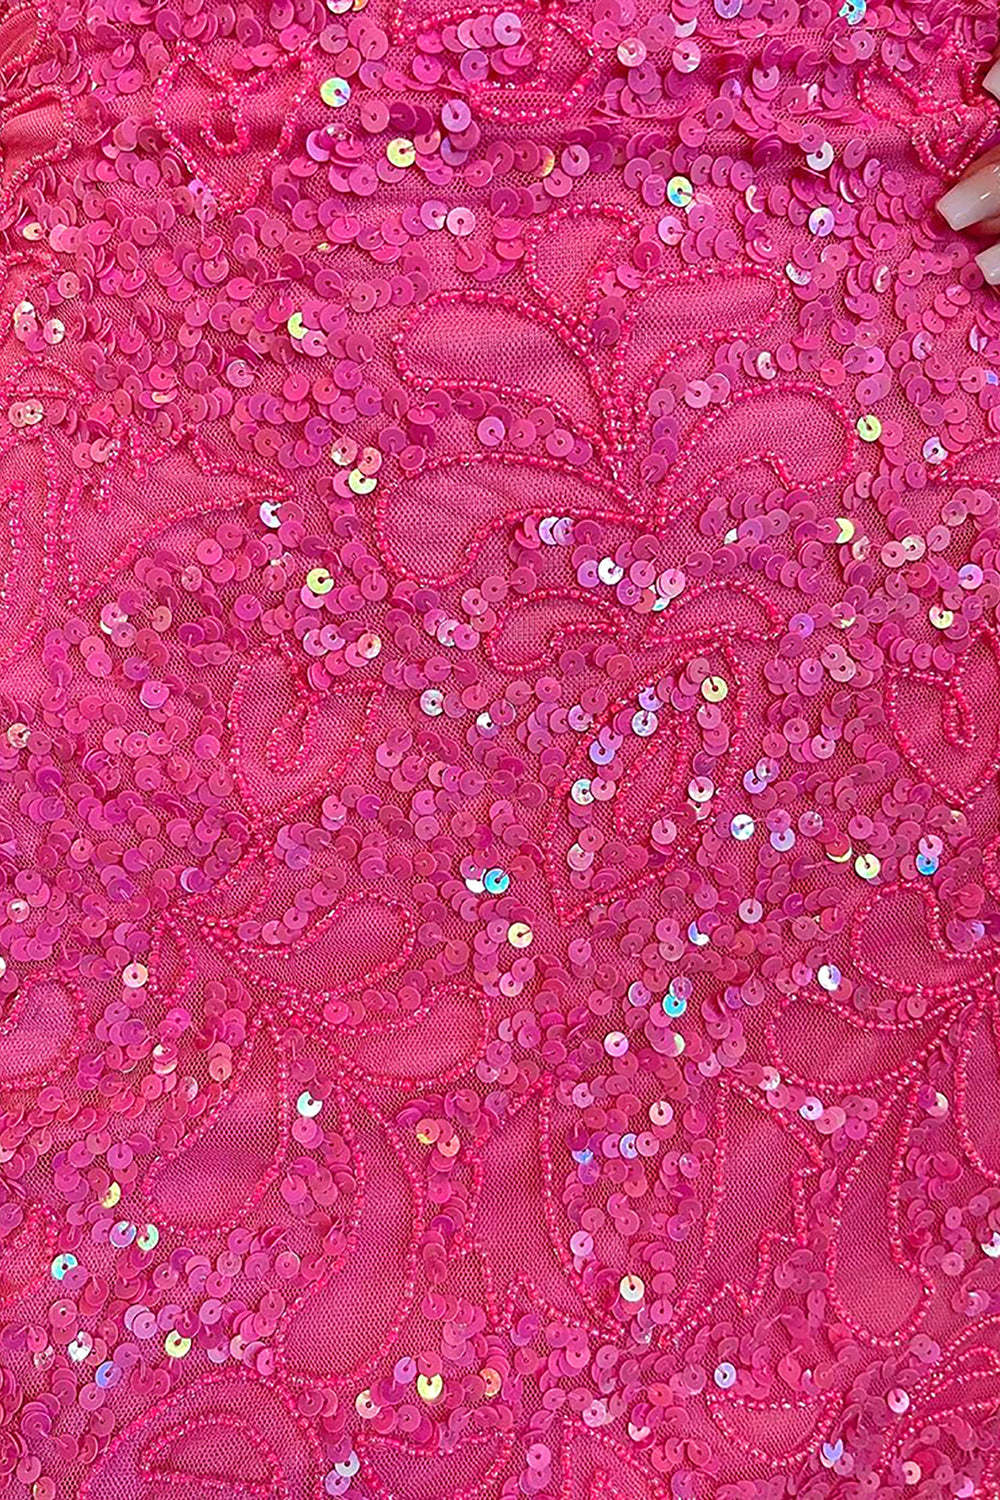 Sparkly Sheath Spaghetti Straps Pink Sequins Short Homecoming Dress